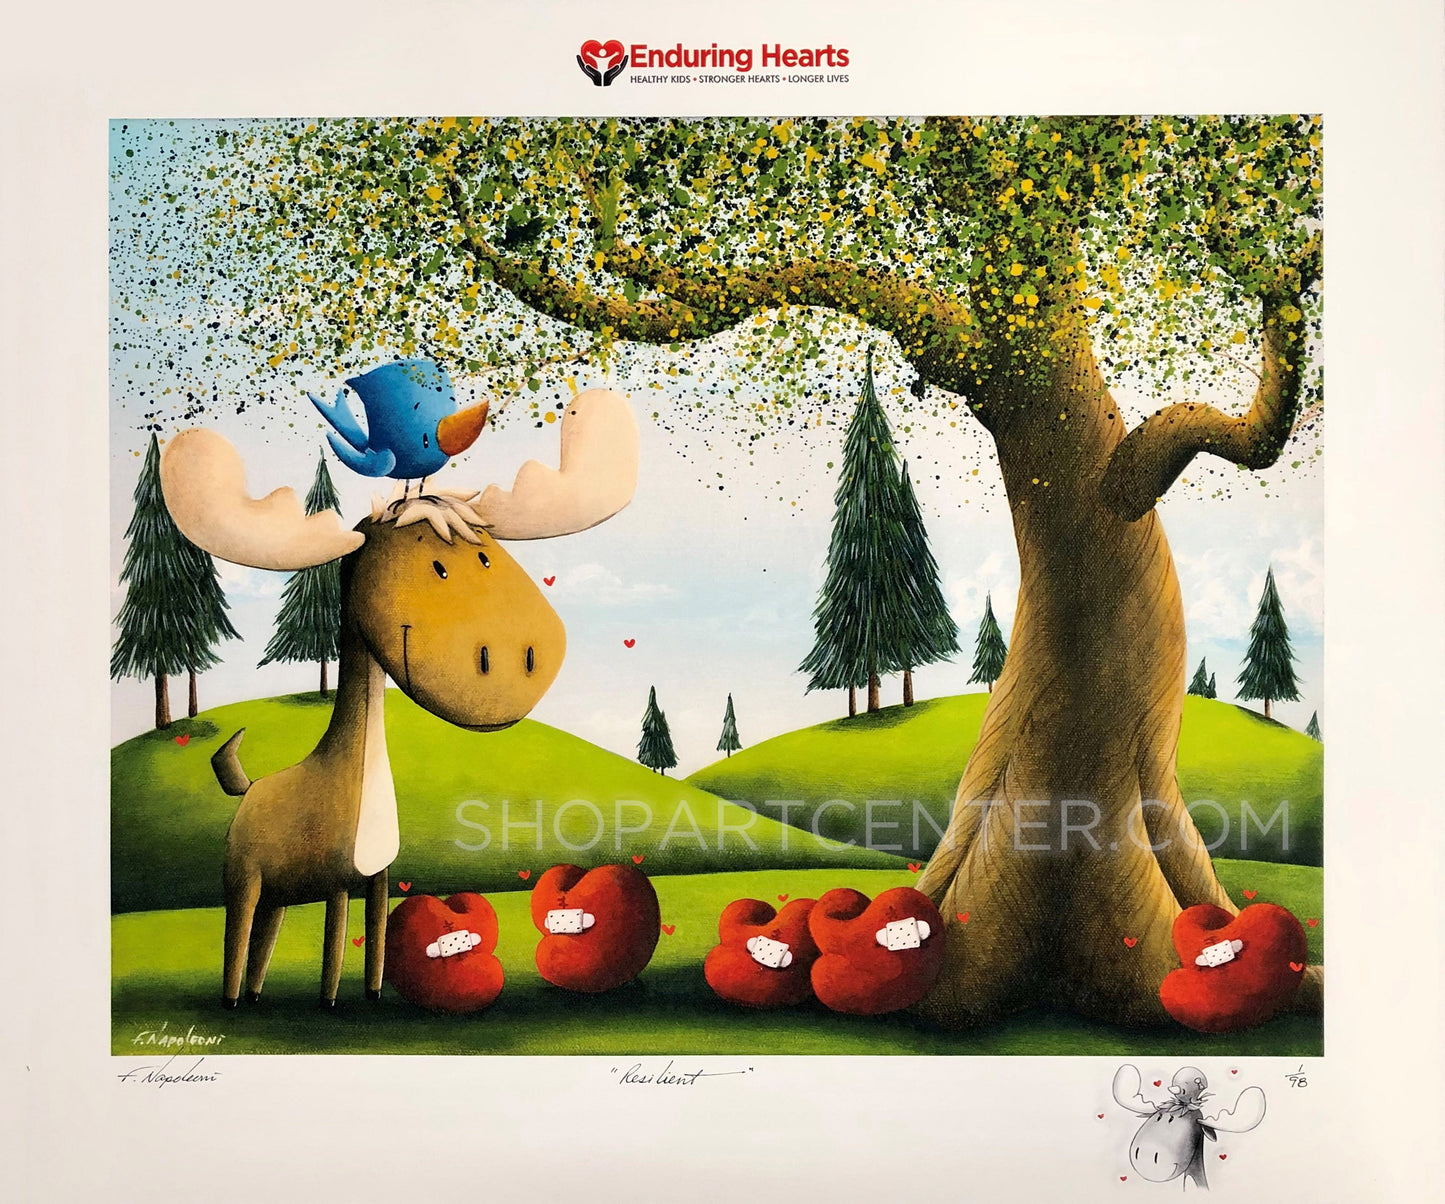 Fabio Napoleoni "Resilient" Limited Edition Paper Giclee